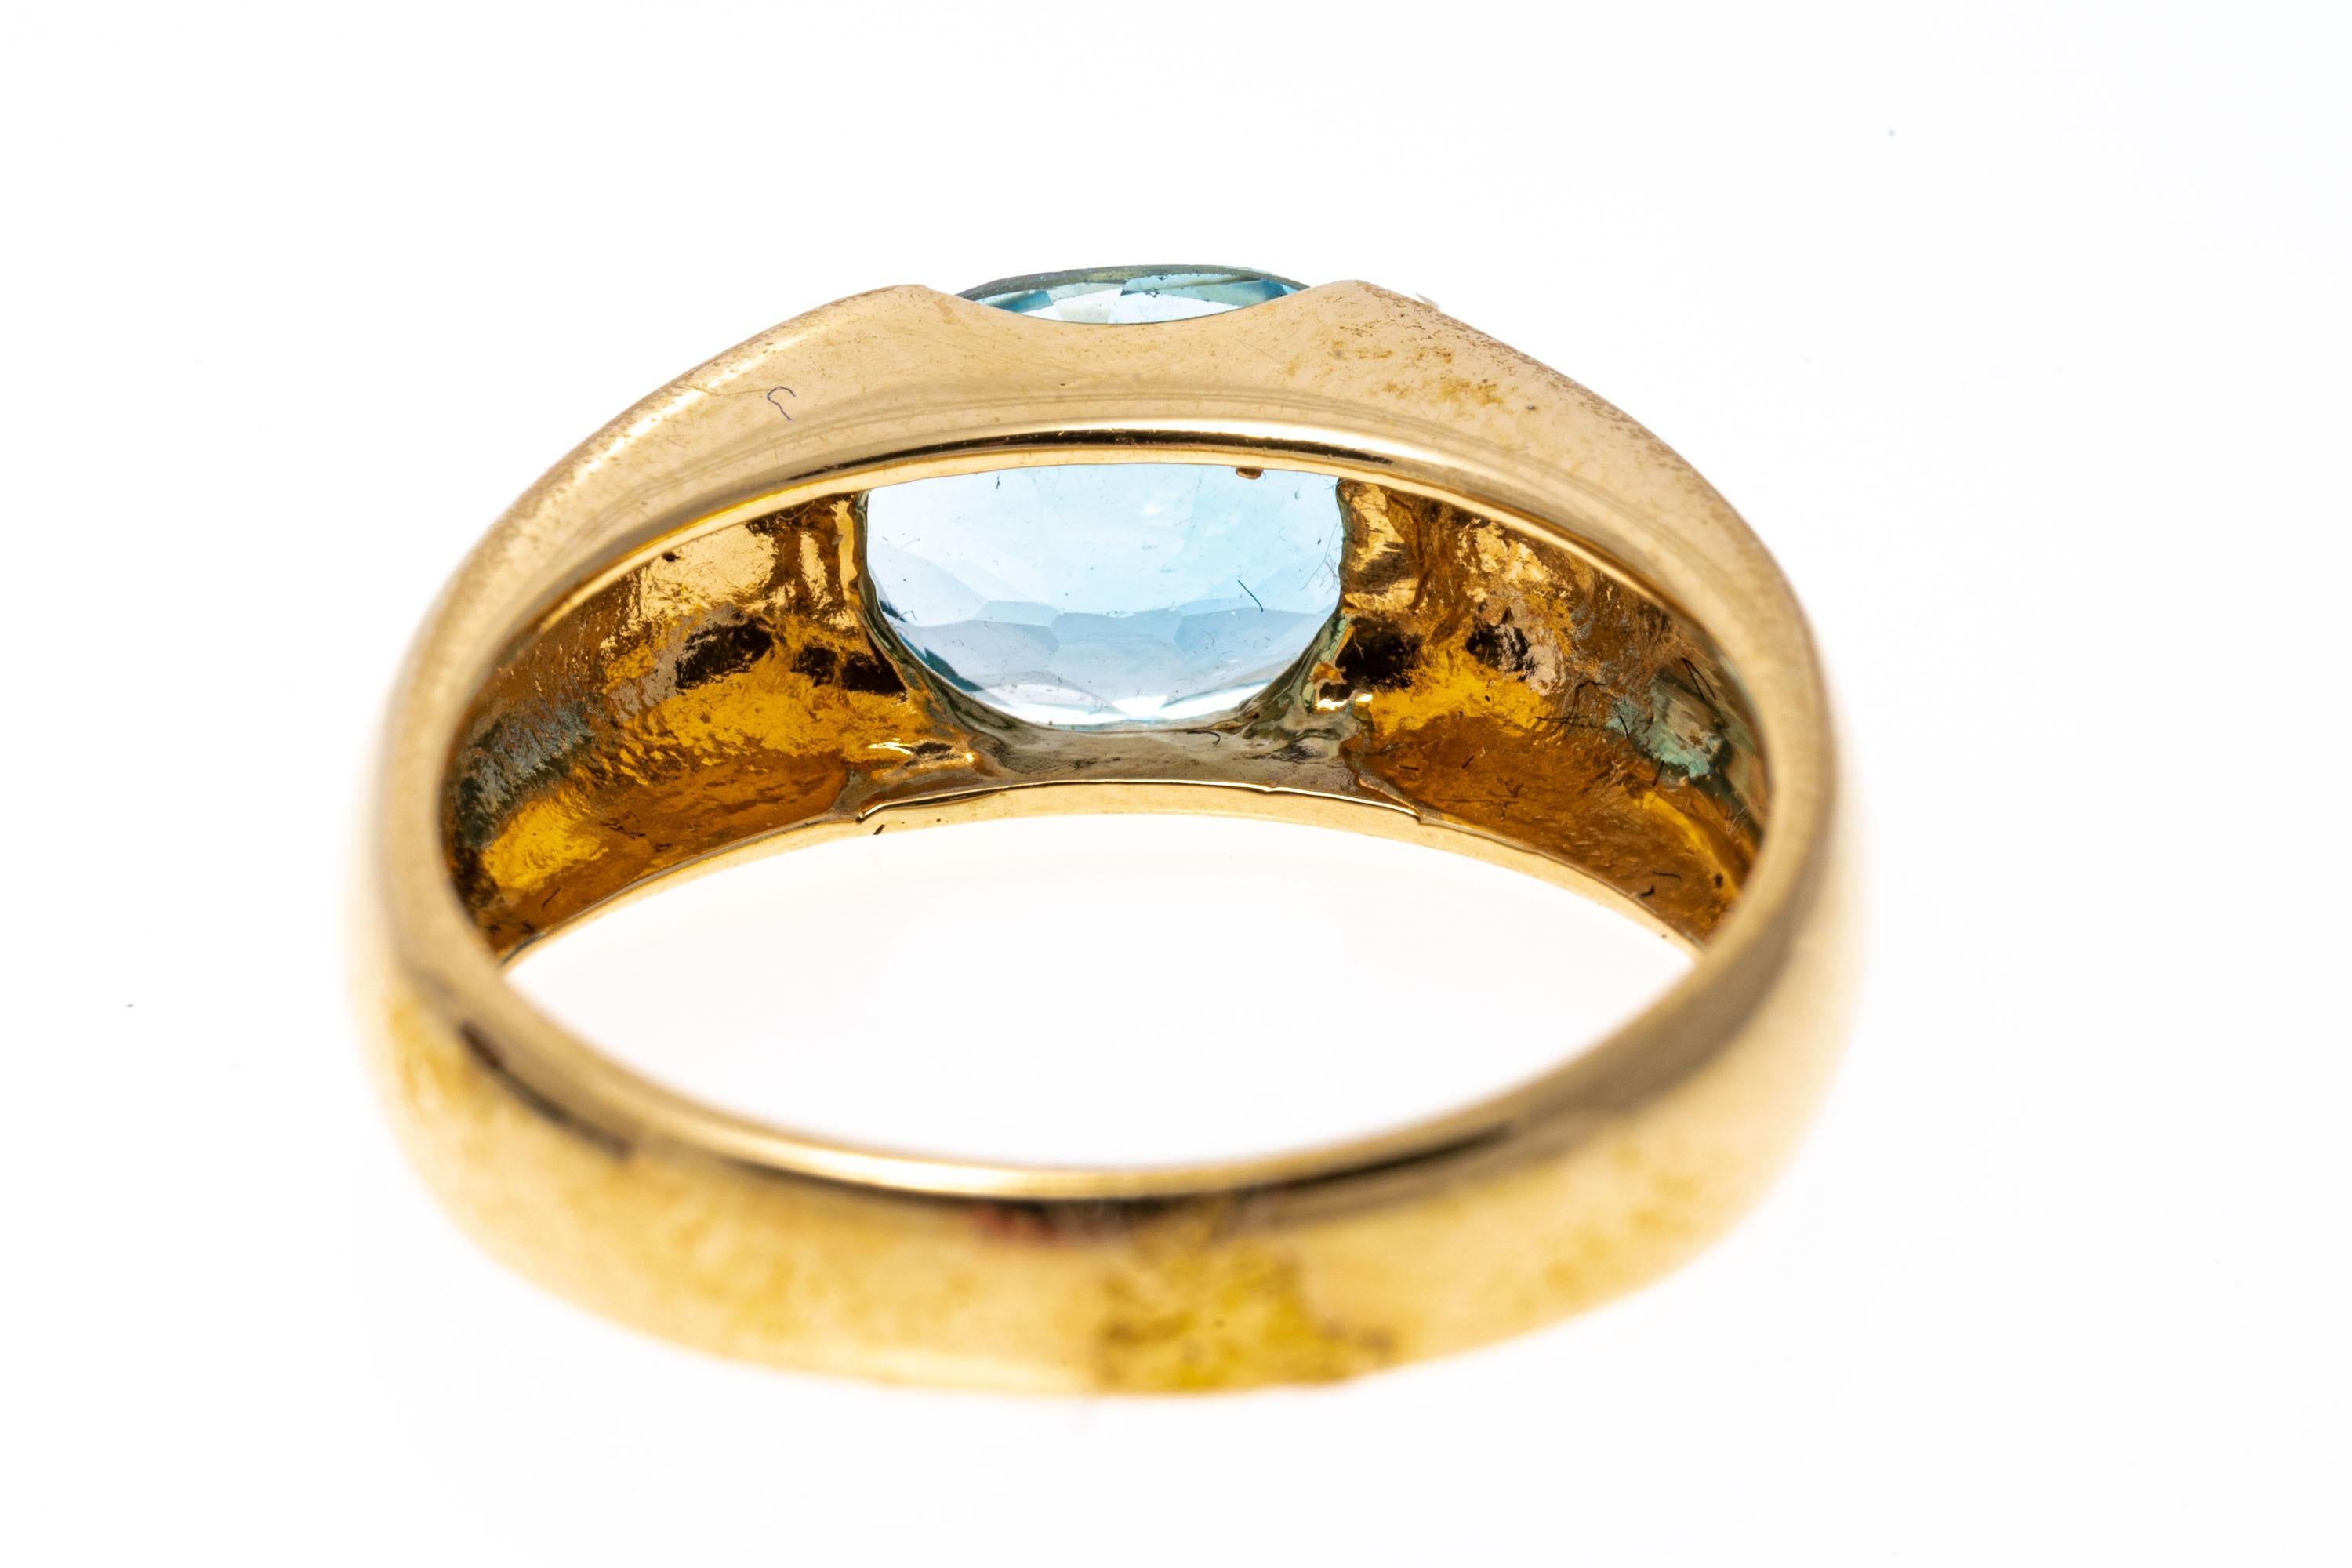 14k yellow gold ring. This handsome, contemporary ring is a horizontal, oval faceted, medium blue color blue topaz, approximately 1.97 CTS, half flush set into wide, high polished gold shoulders.
Marks: 14k
Dimensions: 5/16